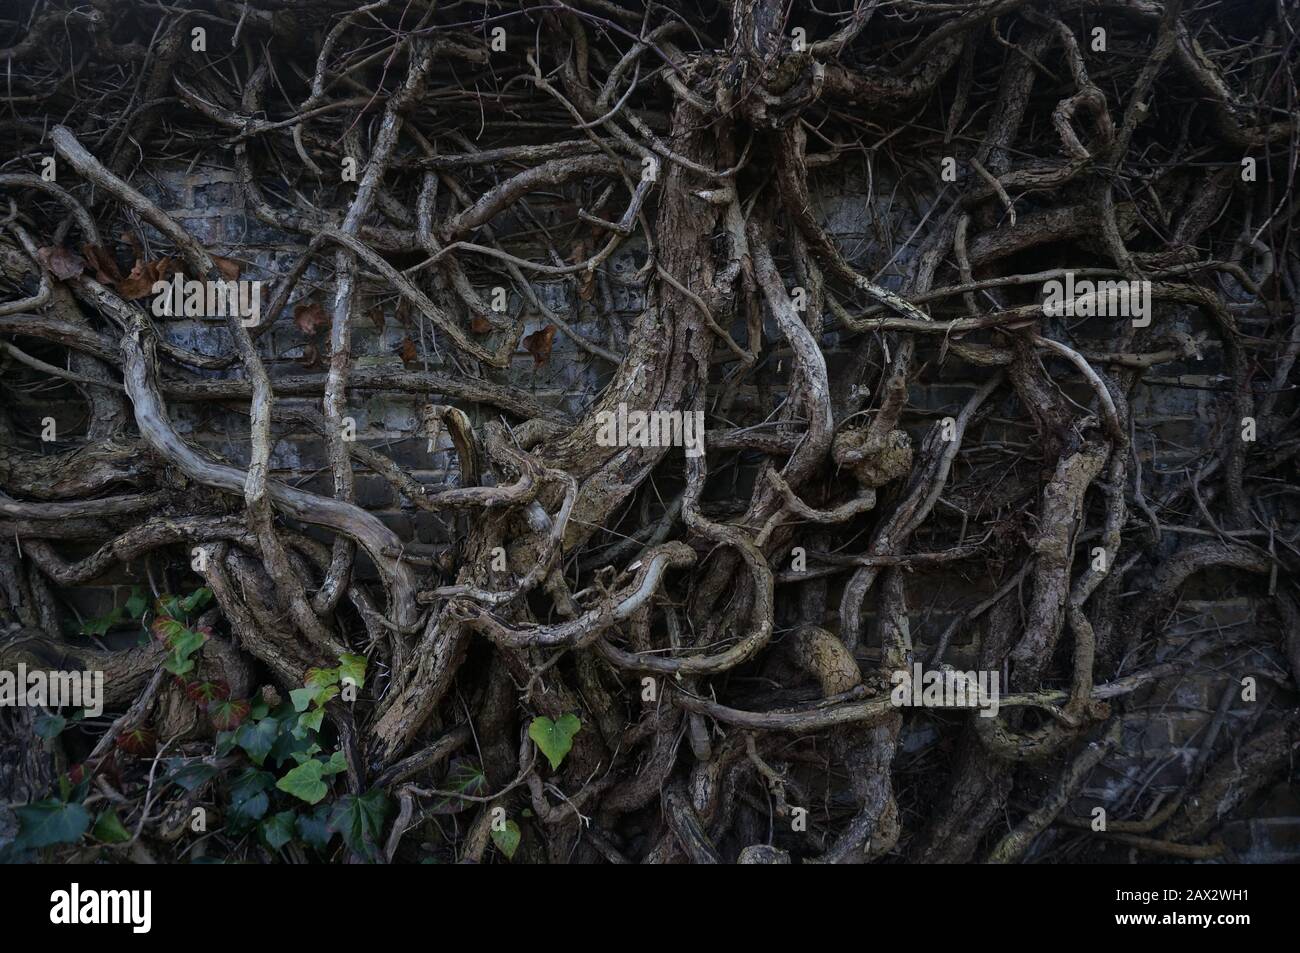 Knotted vines Stock Photo